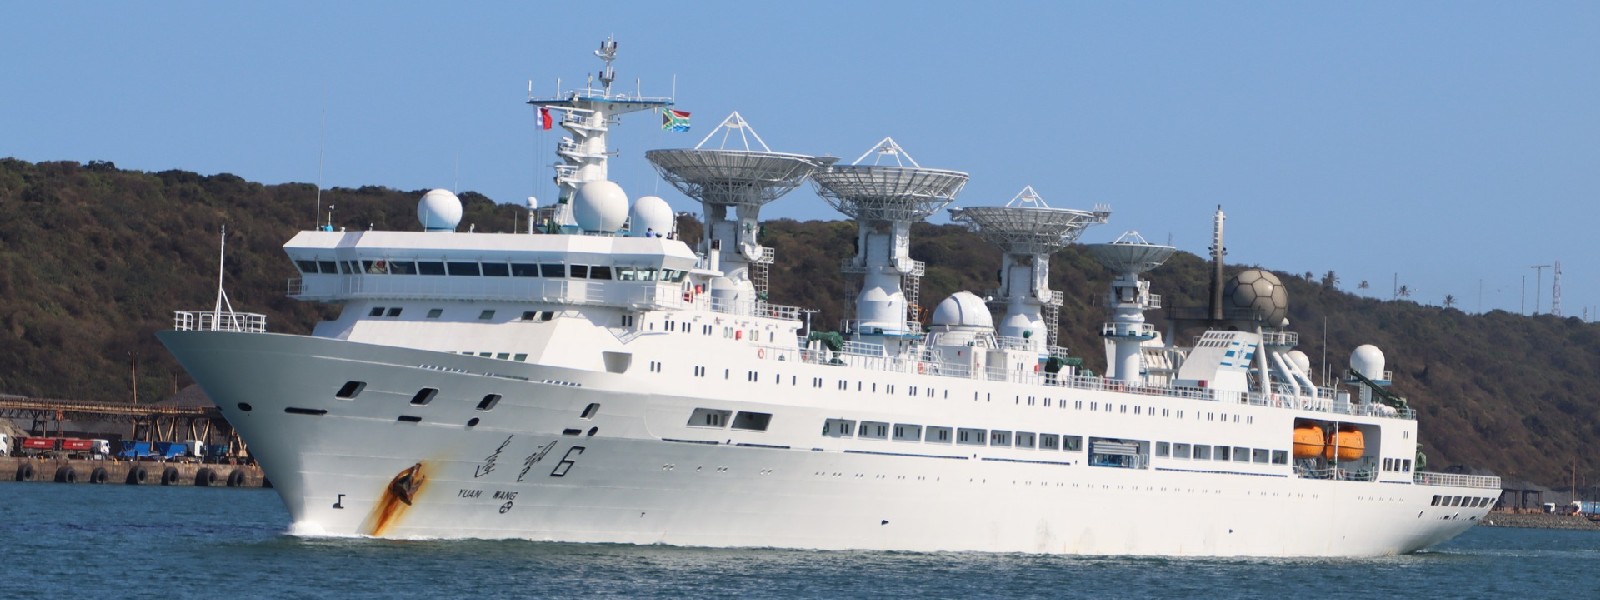 Concerns mount over Chinese ships in SL